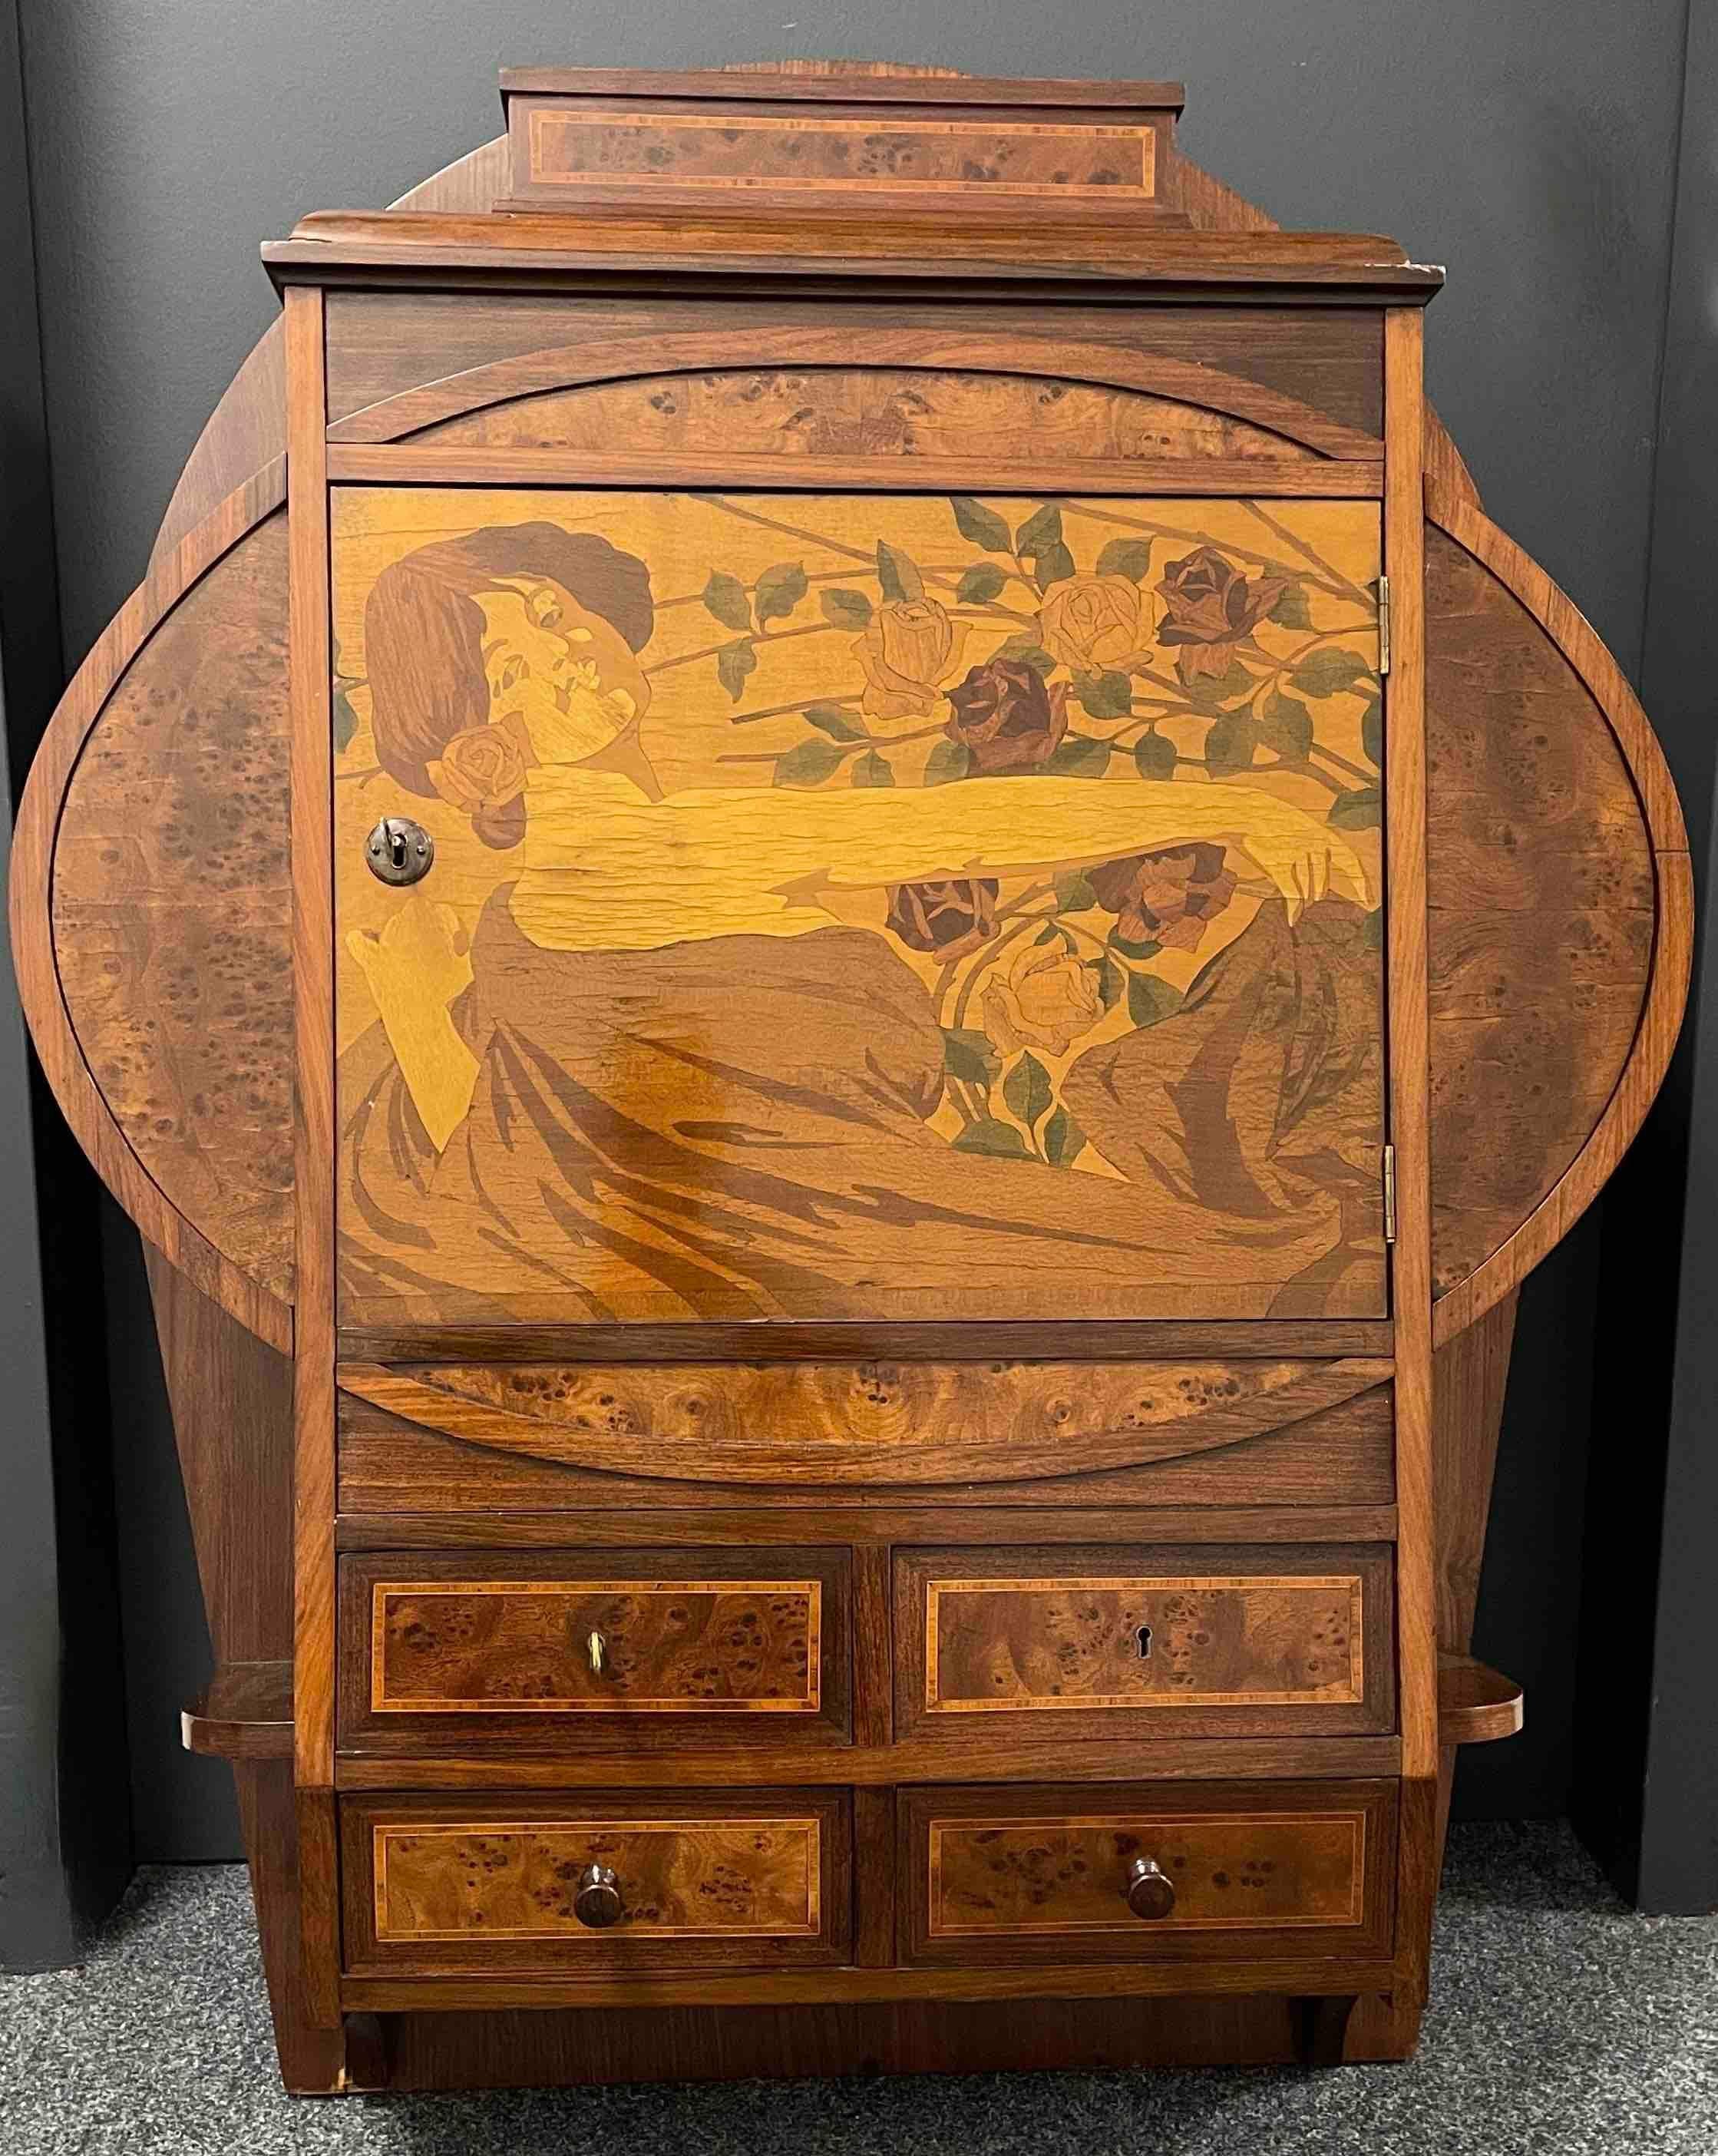 Beautiful wall cabinet with 4 drawers and marquetry inlay Door. Perfect as a furniture in your dressing room for your lingerie or in your living room. It could also be great at the wall as a Humidor for your Cigars. The piece is in very good antique